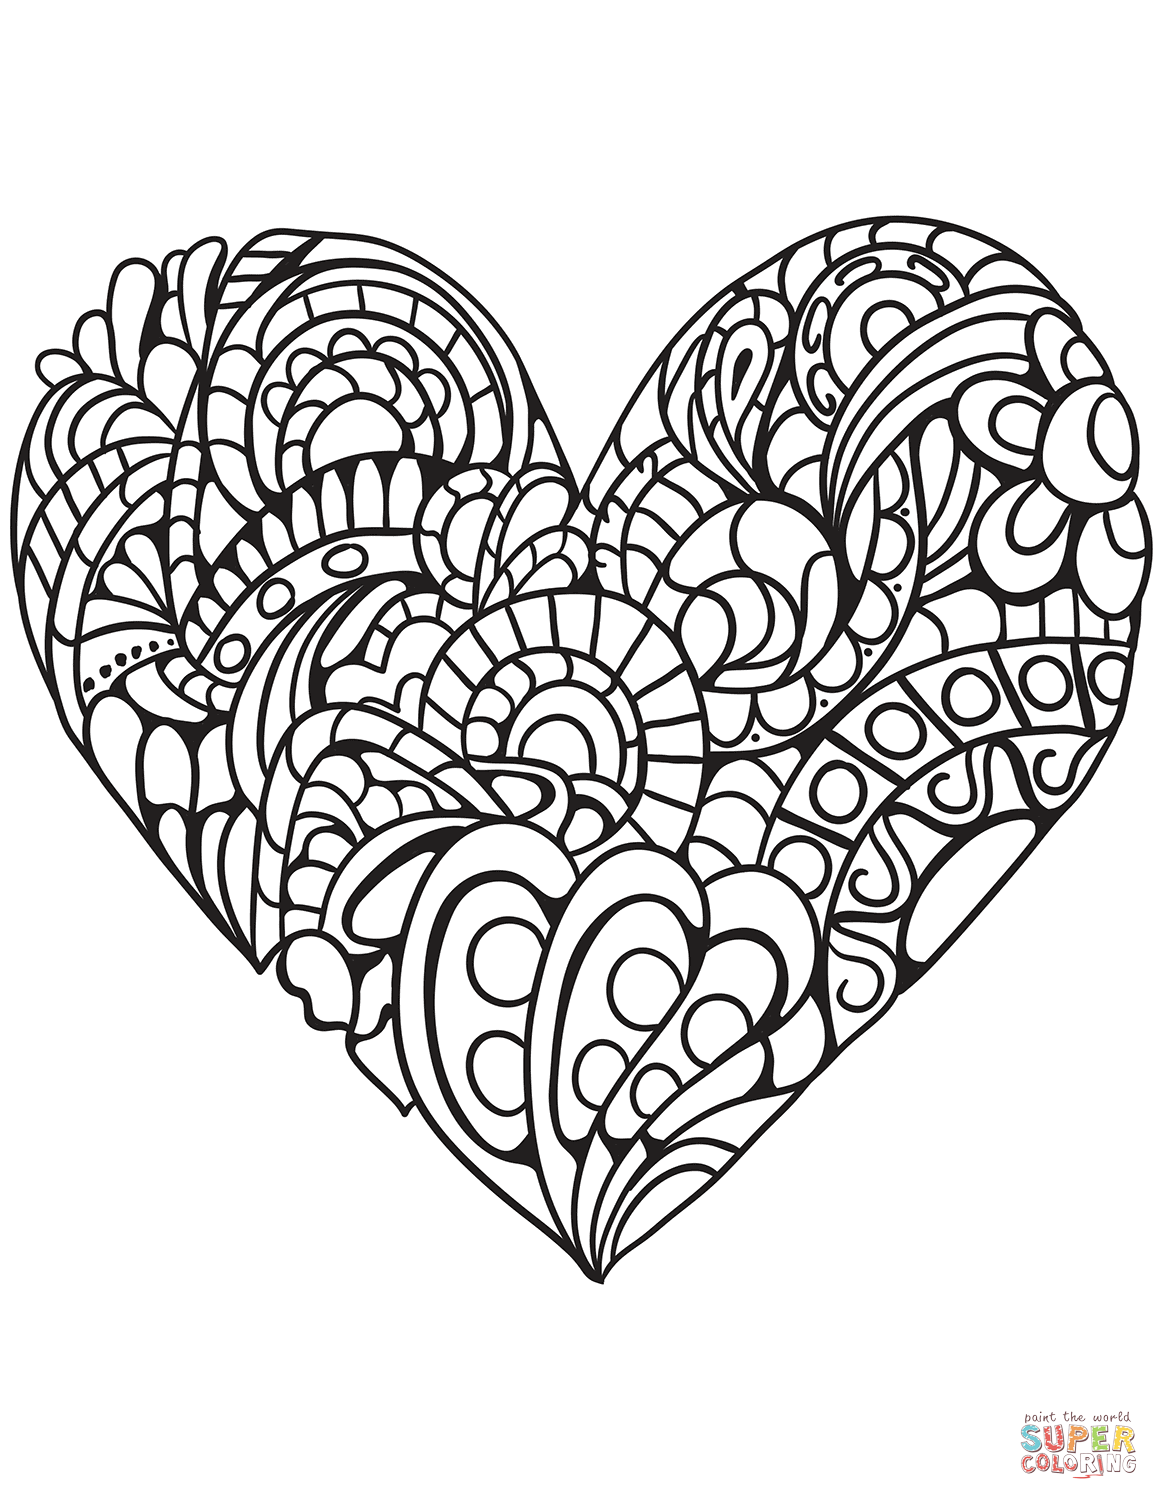 Detailed Heart Coloring Pages at GetColorings.com | Free printable